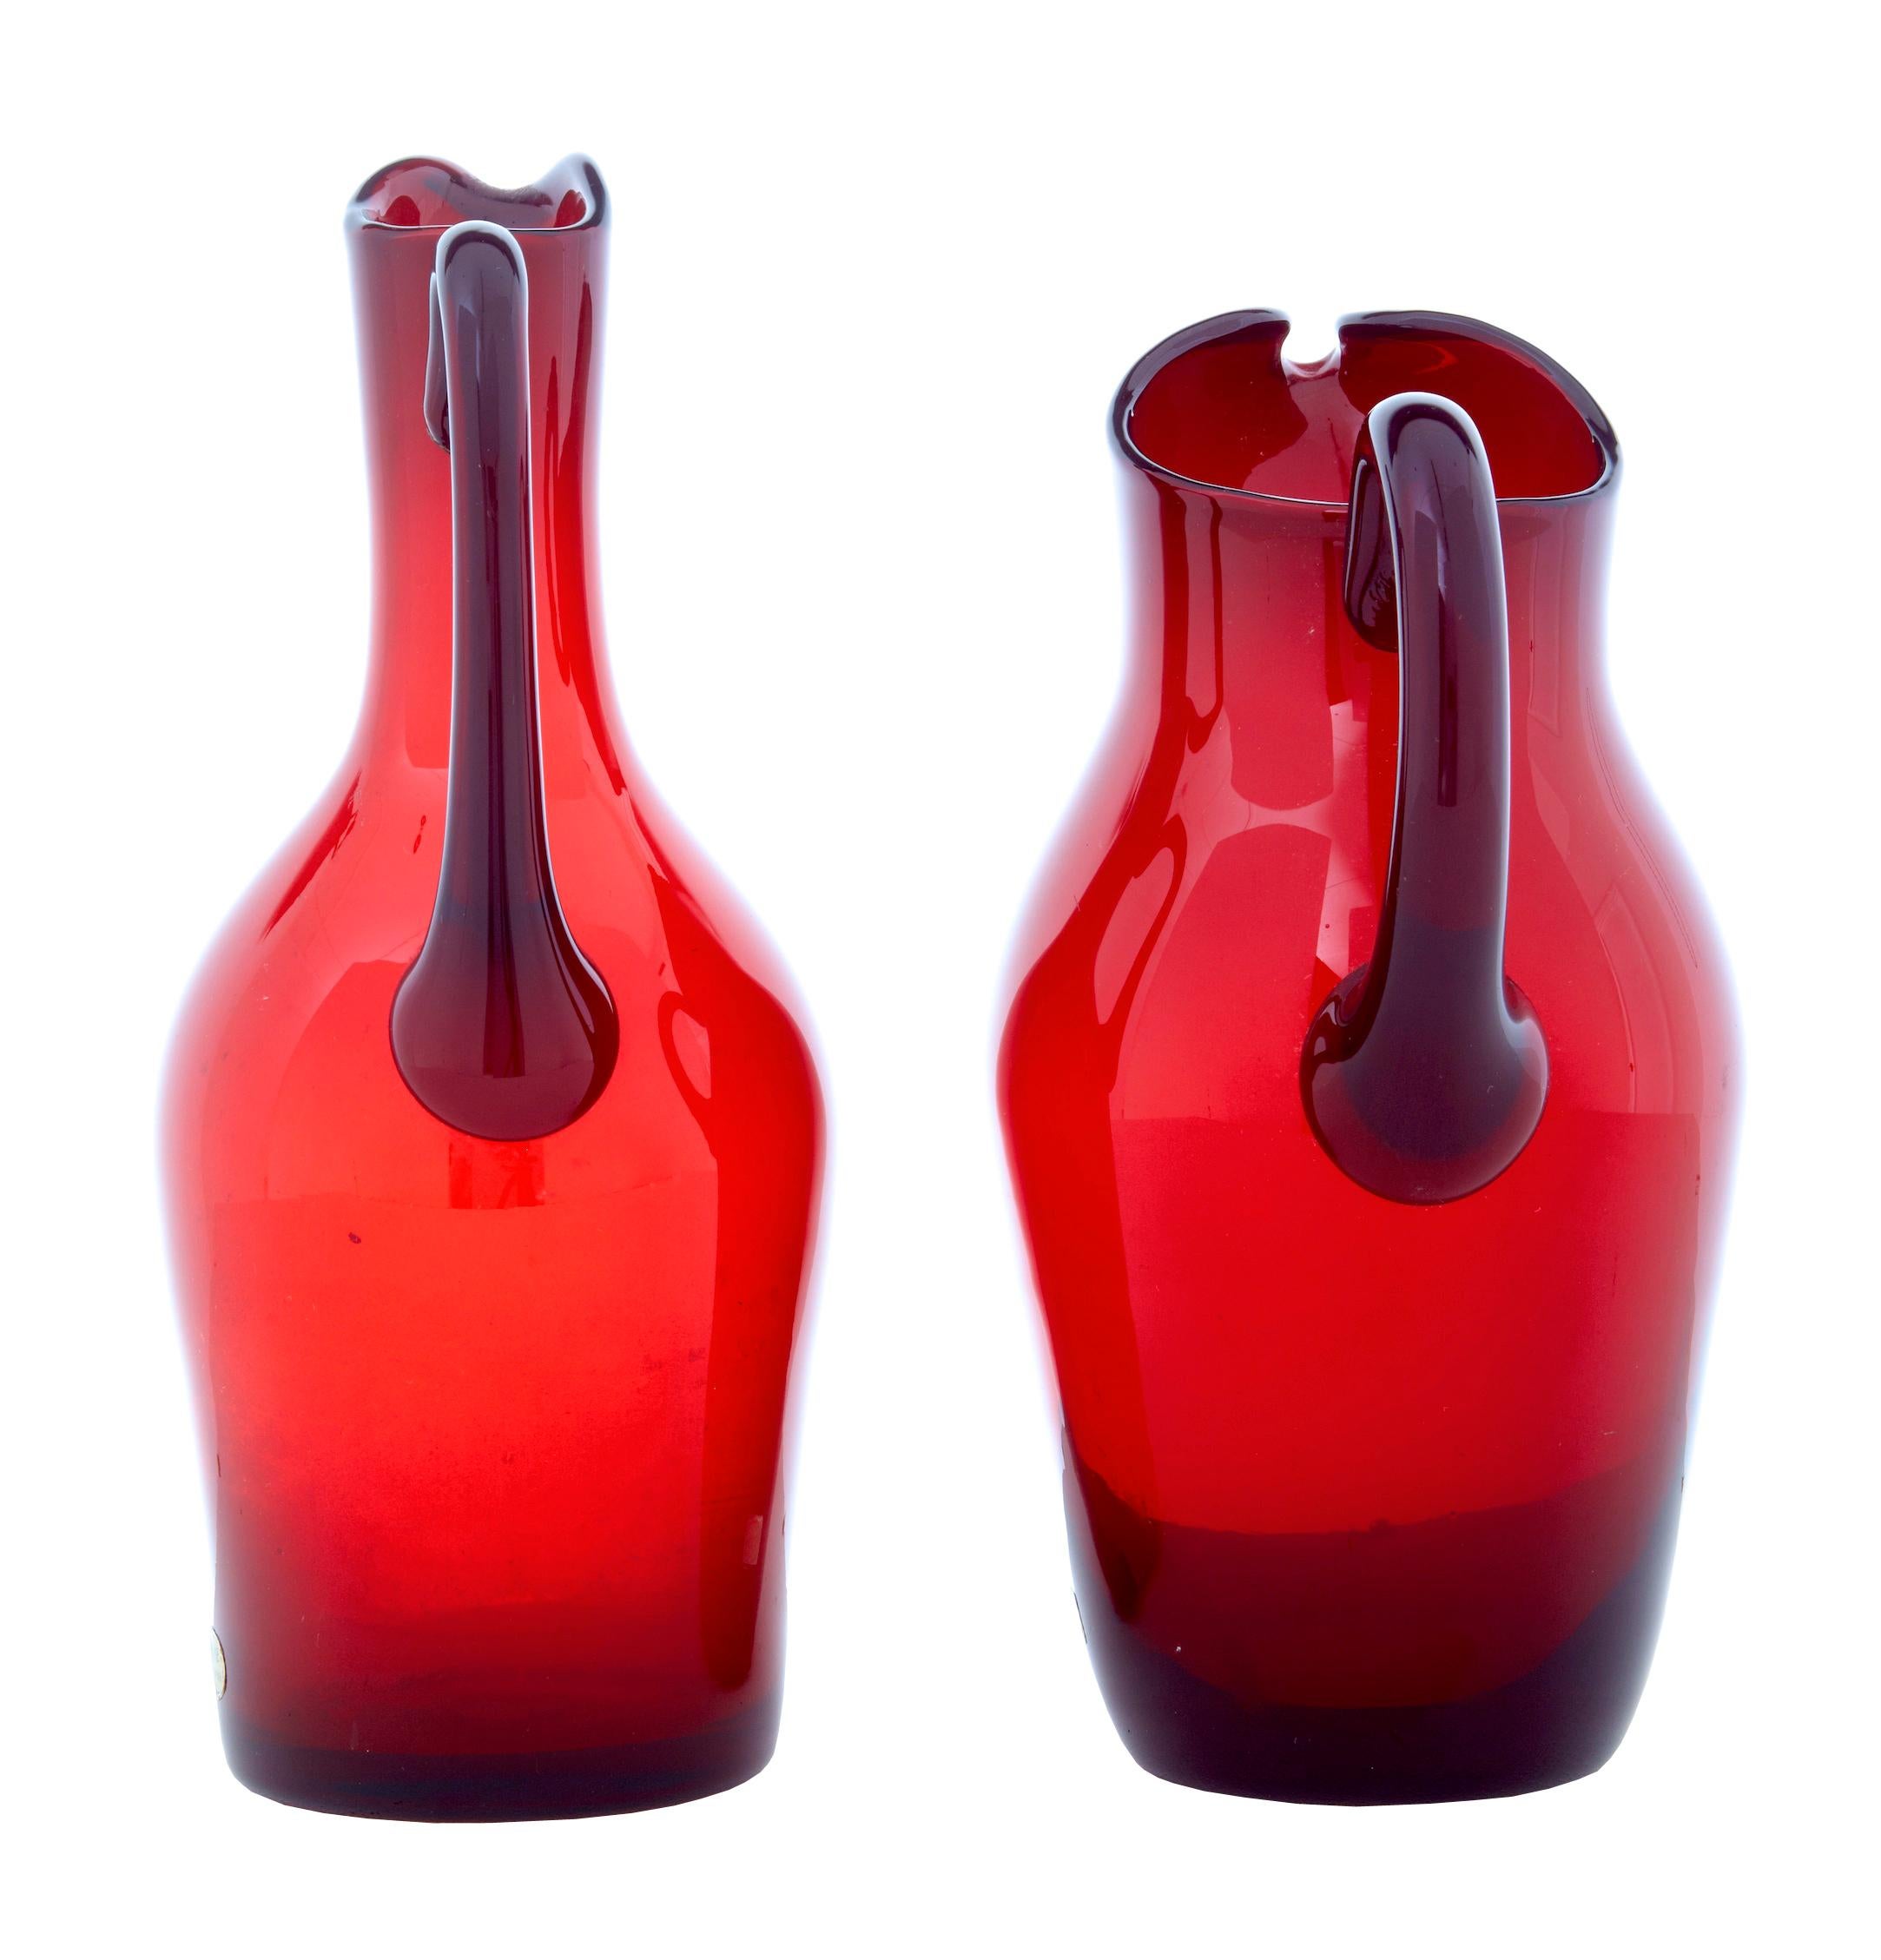 Mid 20th century pair of 1950's red art glass jugs by Monica Bratt circa 1950.

Monica Bratt (1913-1961) was a Swedish artist who worked mainly in glassware at the Reijmyre glassworks.

Stunning pair of claret or water jugs, ideal for display or